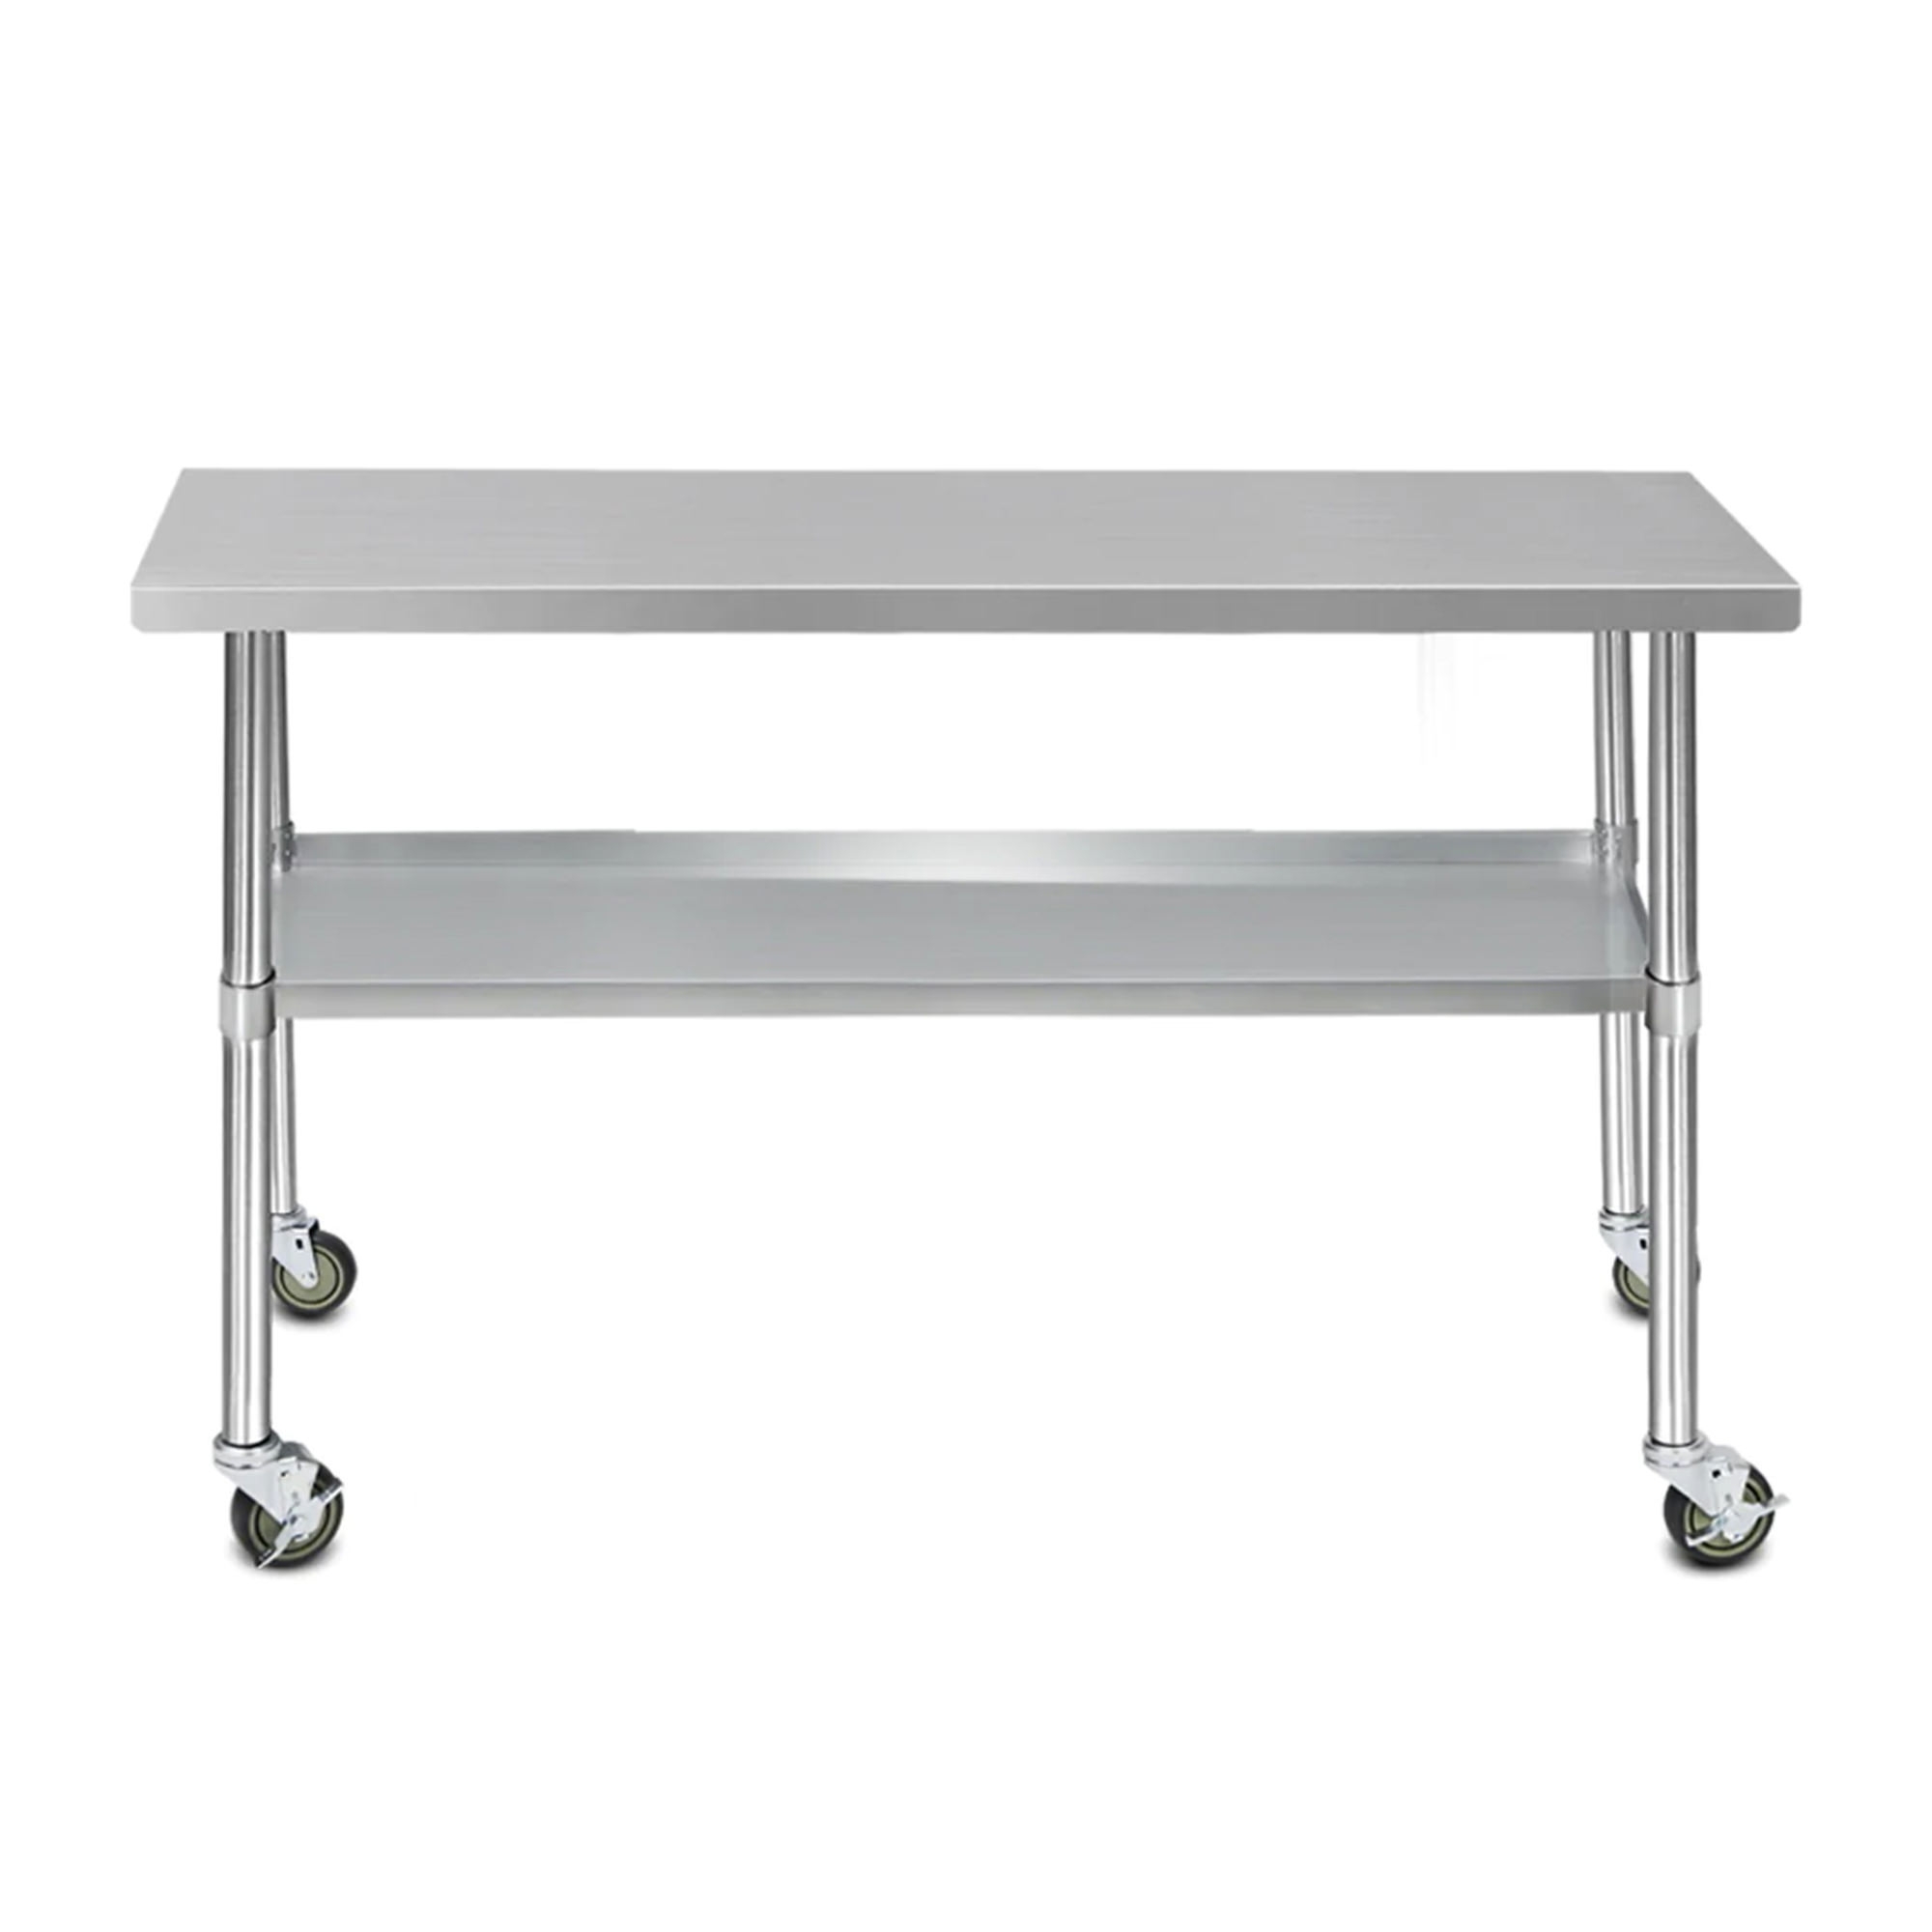 Cefito 304 Stainless Steel Kitchen Bench with Wheels 152.4x61cm Image 2